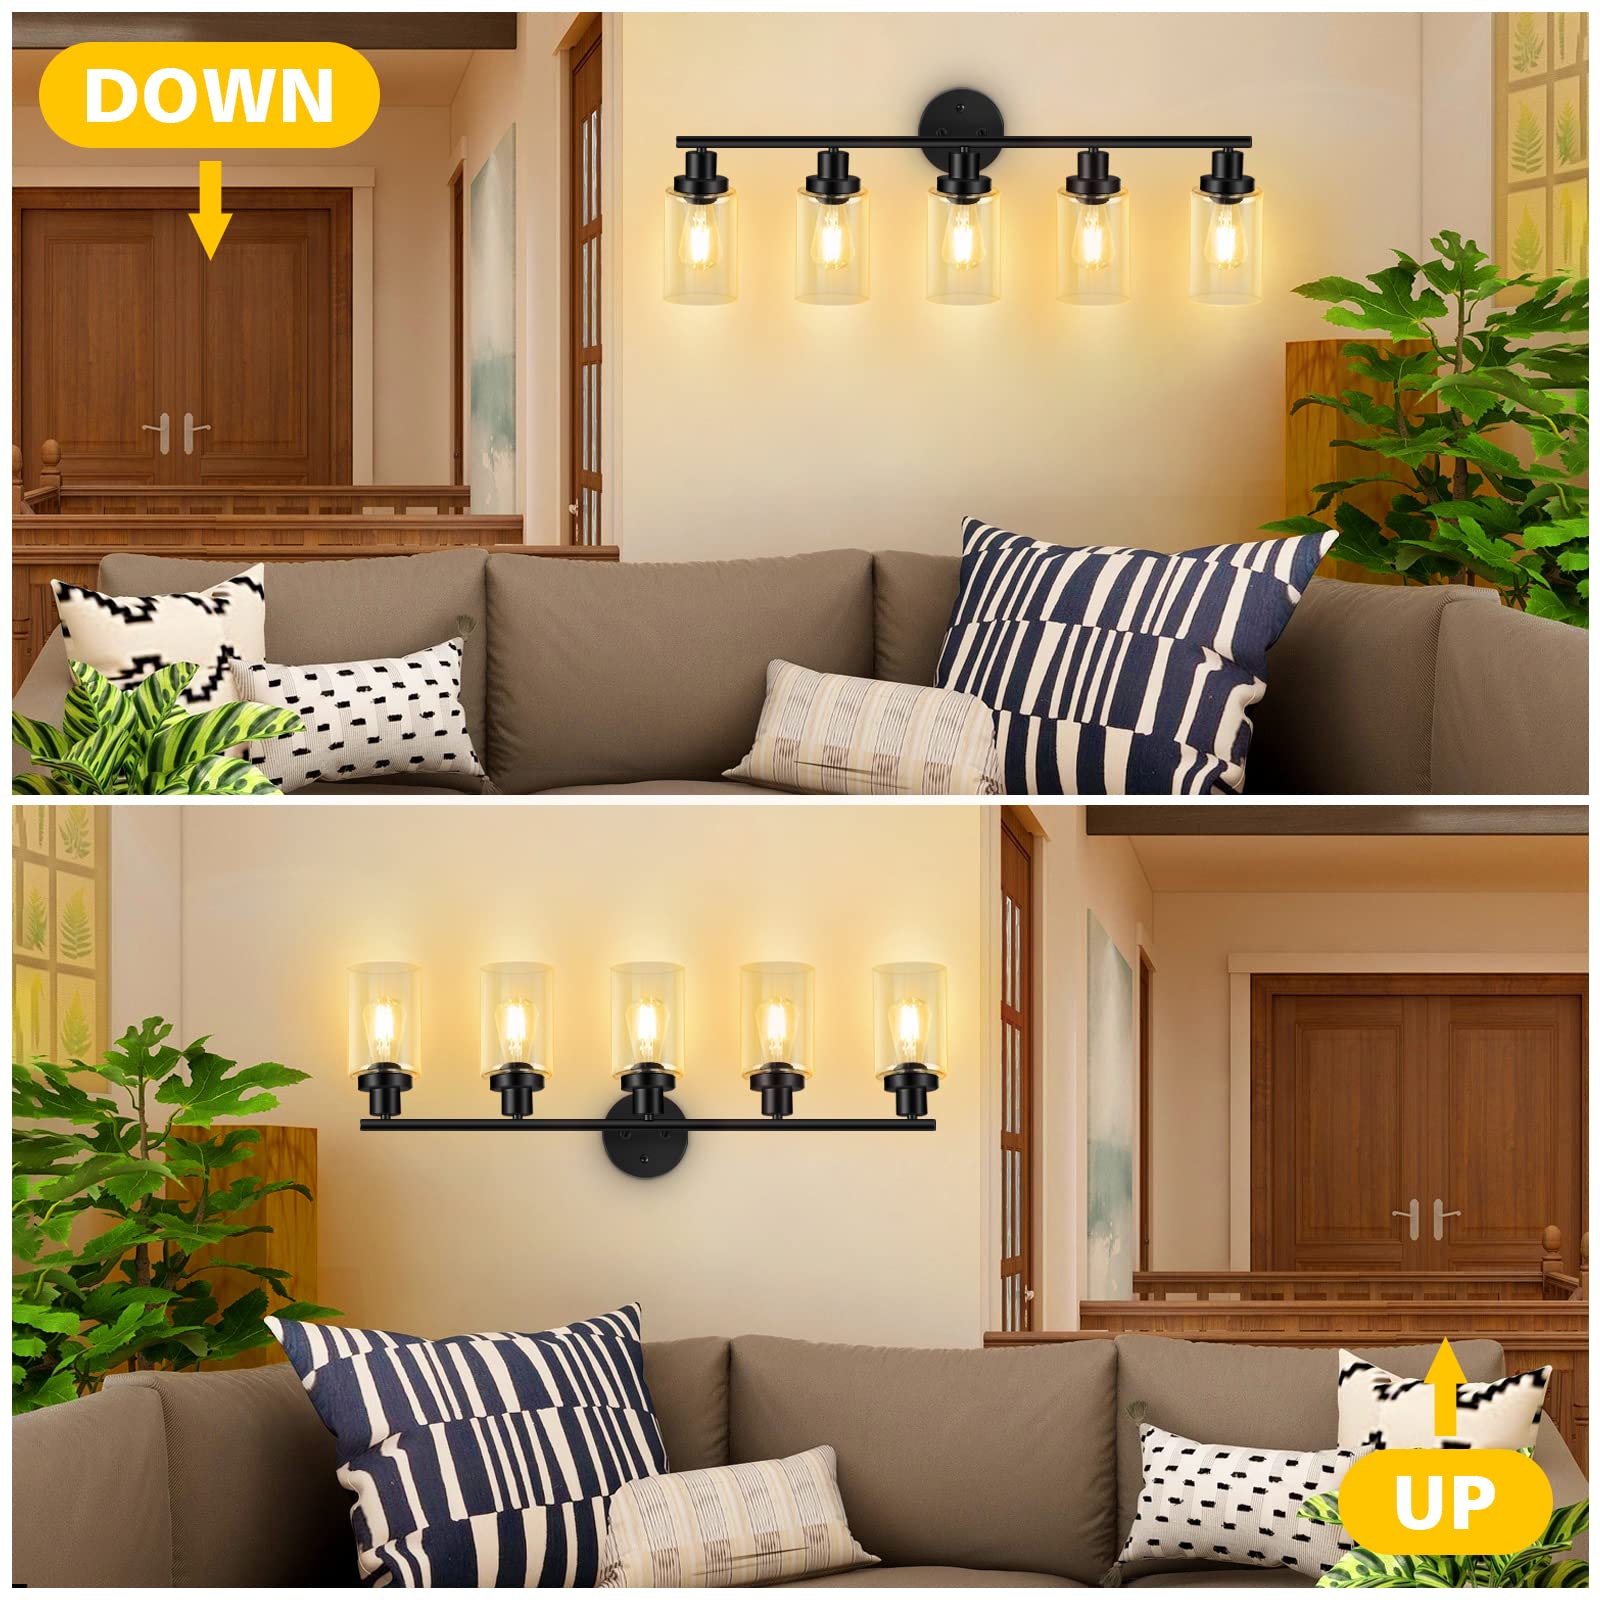 Unicozin Modern Matte Black 5 Lights Wall Lights, Wall Sconces Light with Clear Glass Shade, Vanity Light Fixtures for Bathroom, Living Room, Kitchen, Bedroom, E26 Base (Bulbs Not Included)